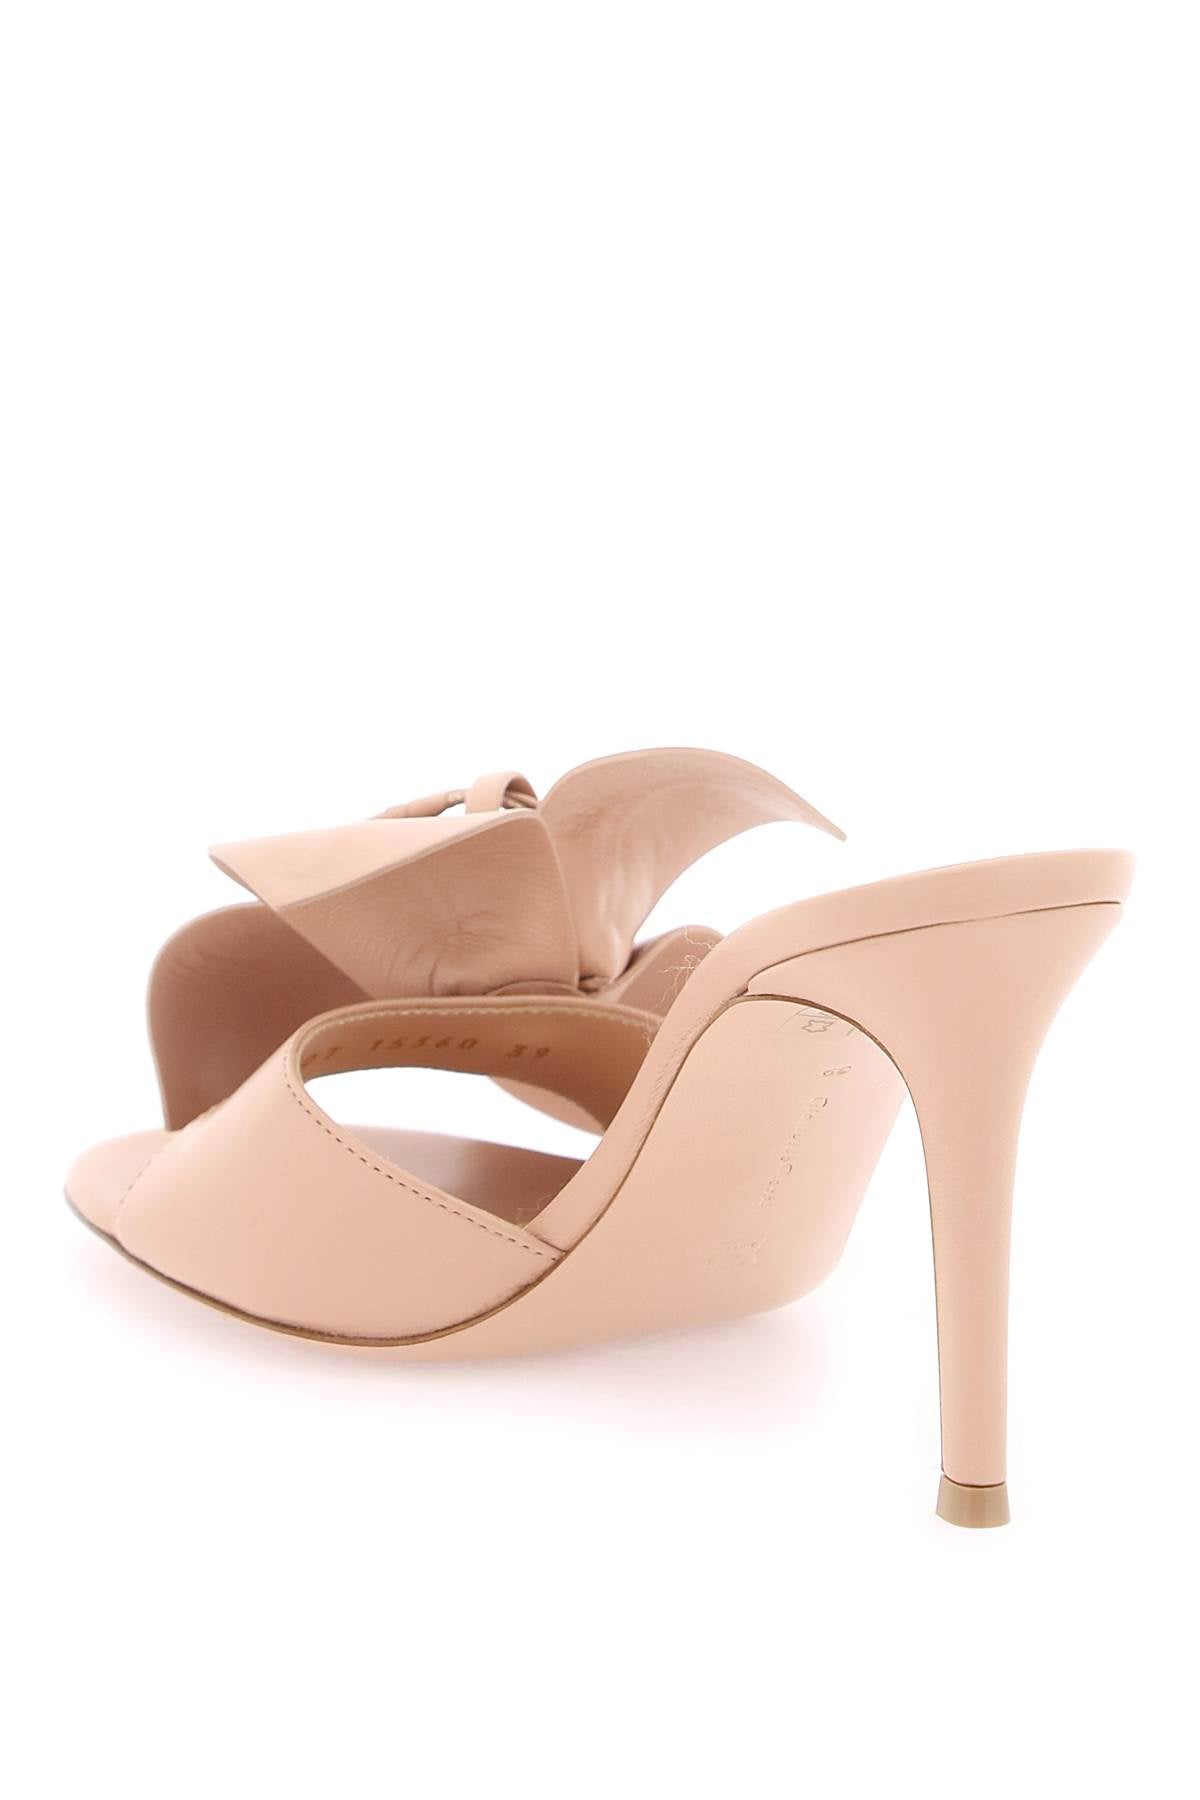 GIANVITO ROSSI Sculptural Leather Flat with Petal Details - Neutral